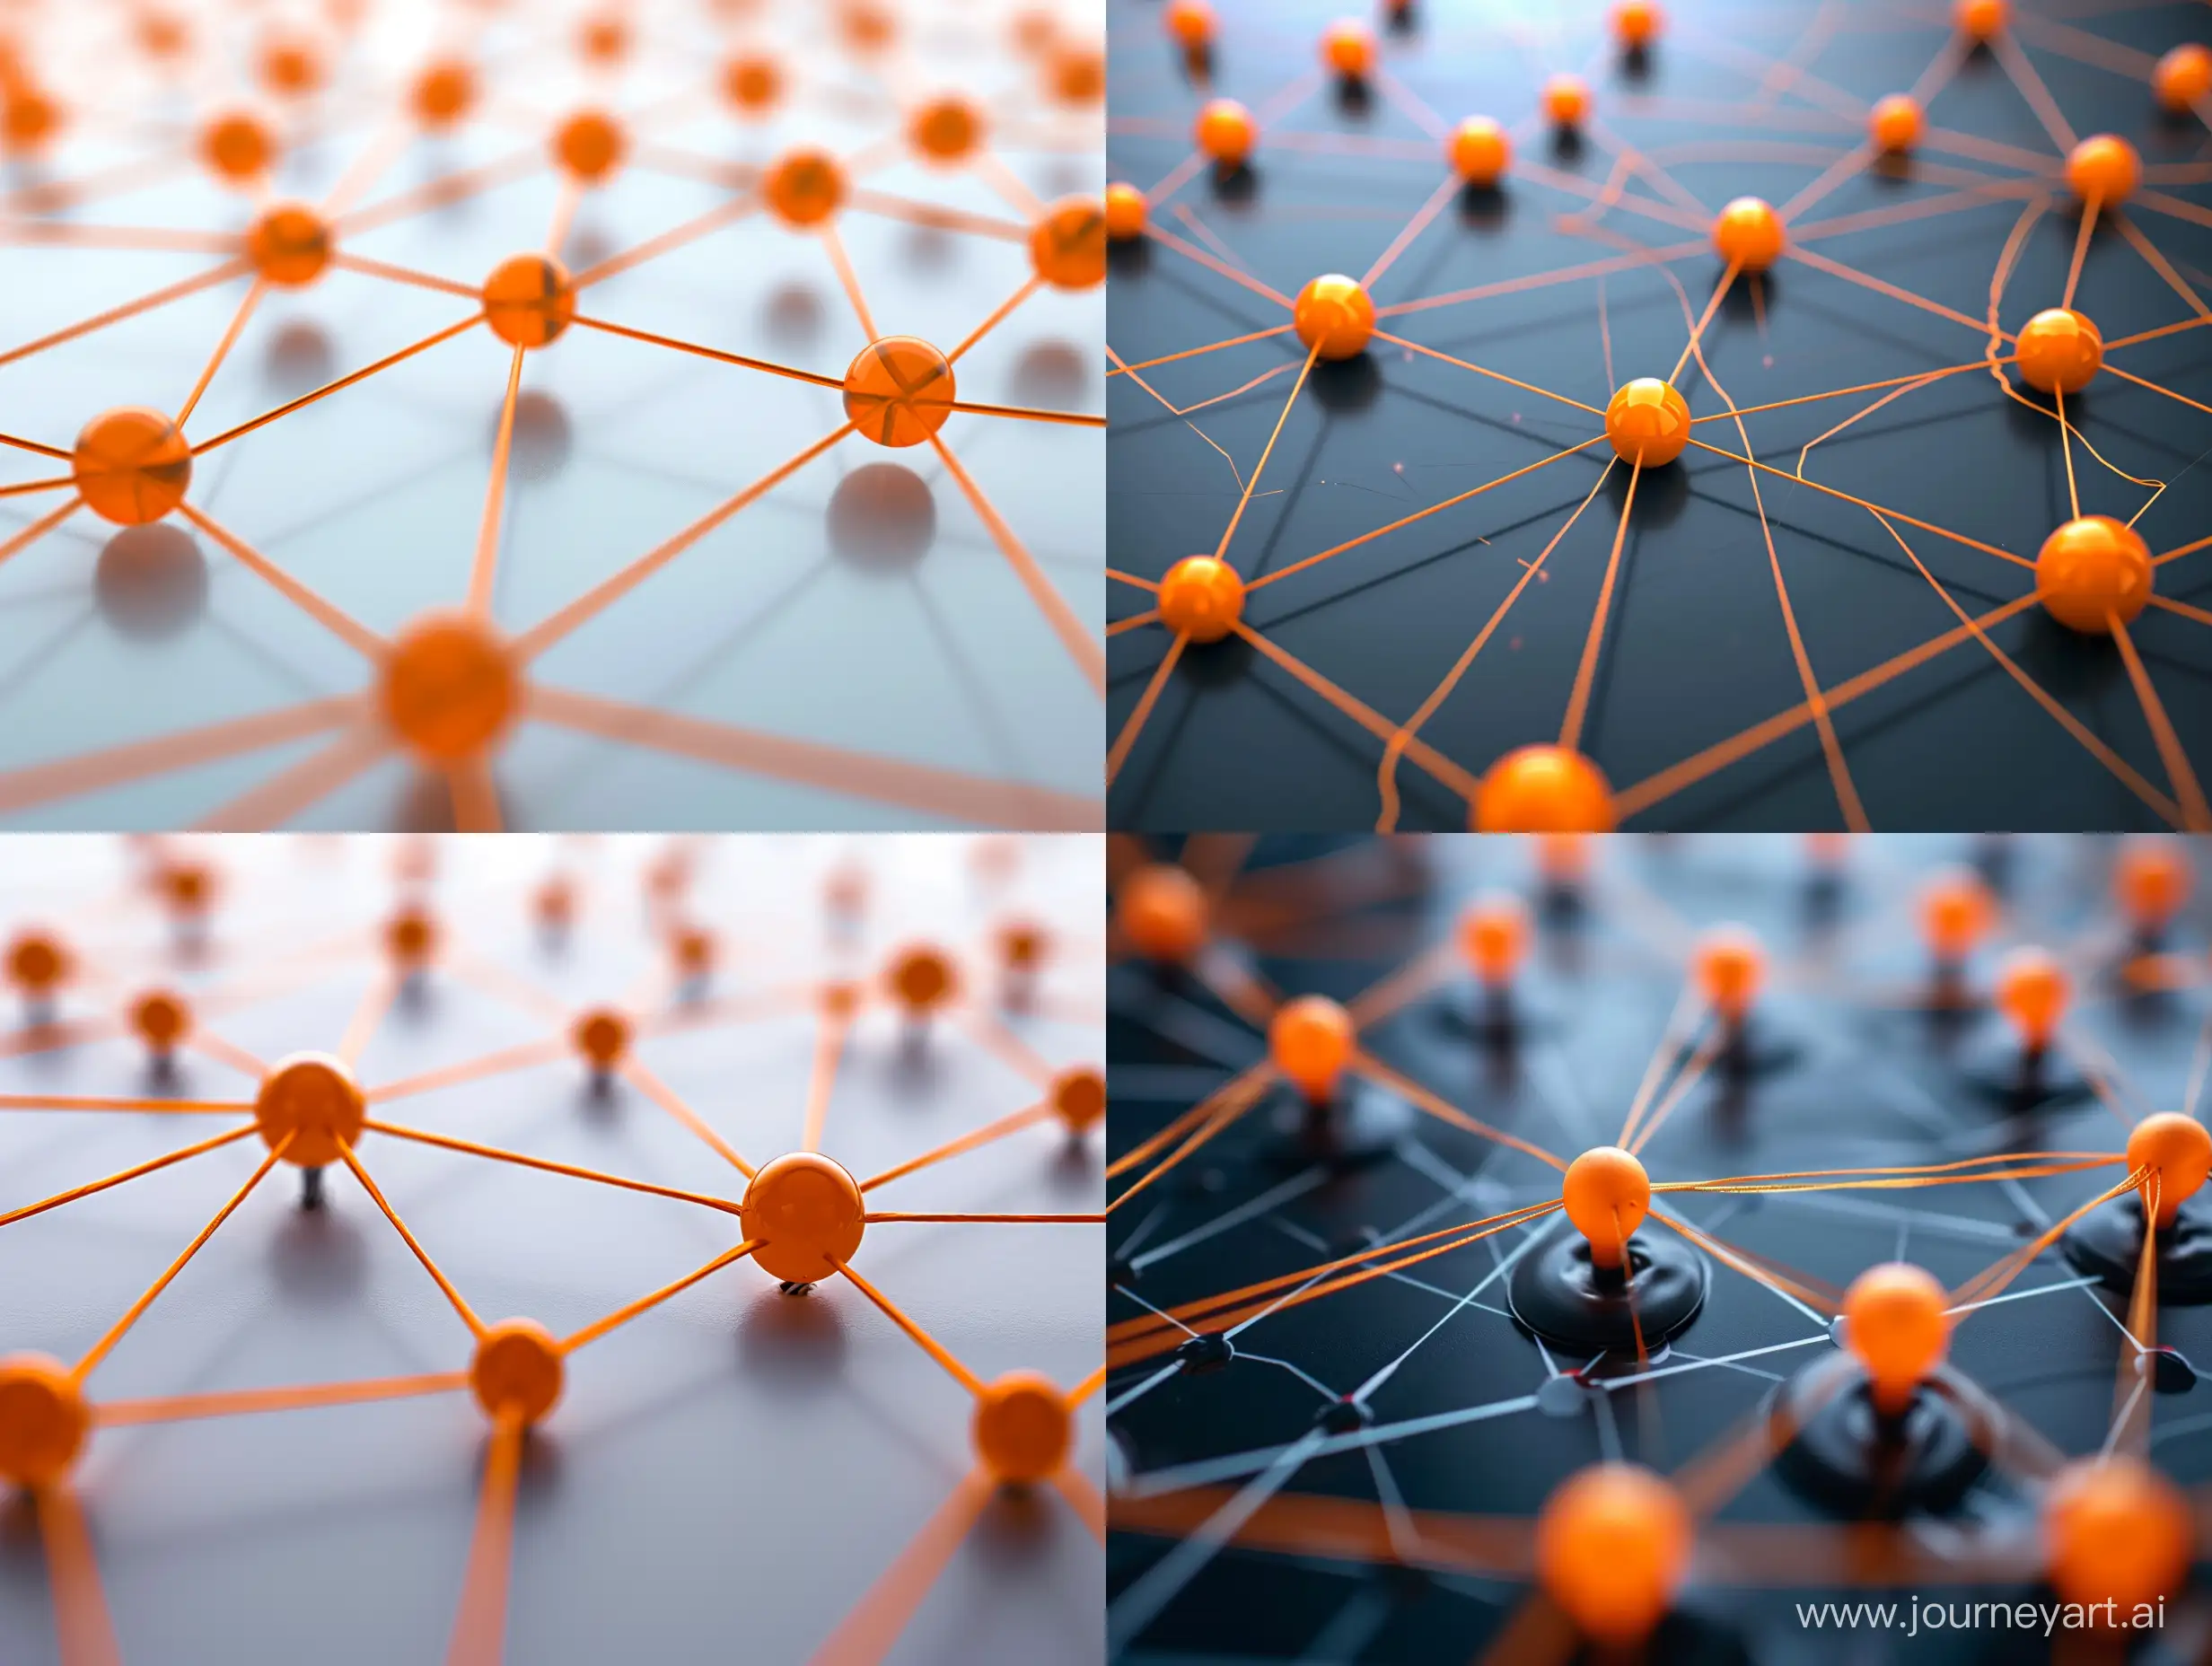 Vibrant-Network-with-Orange-Connections